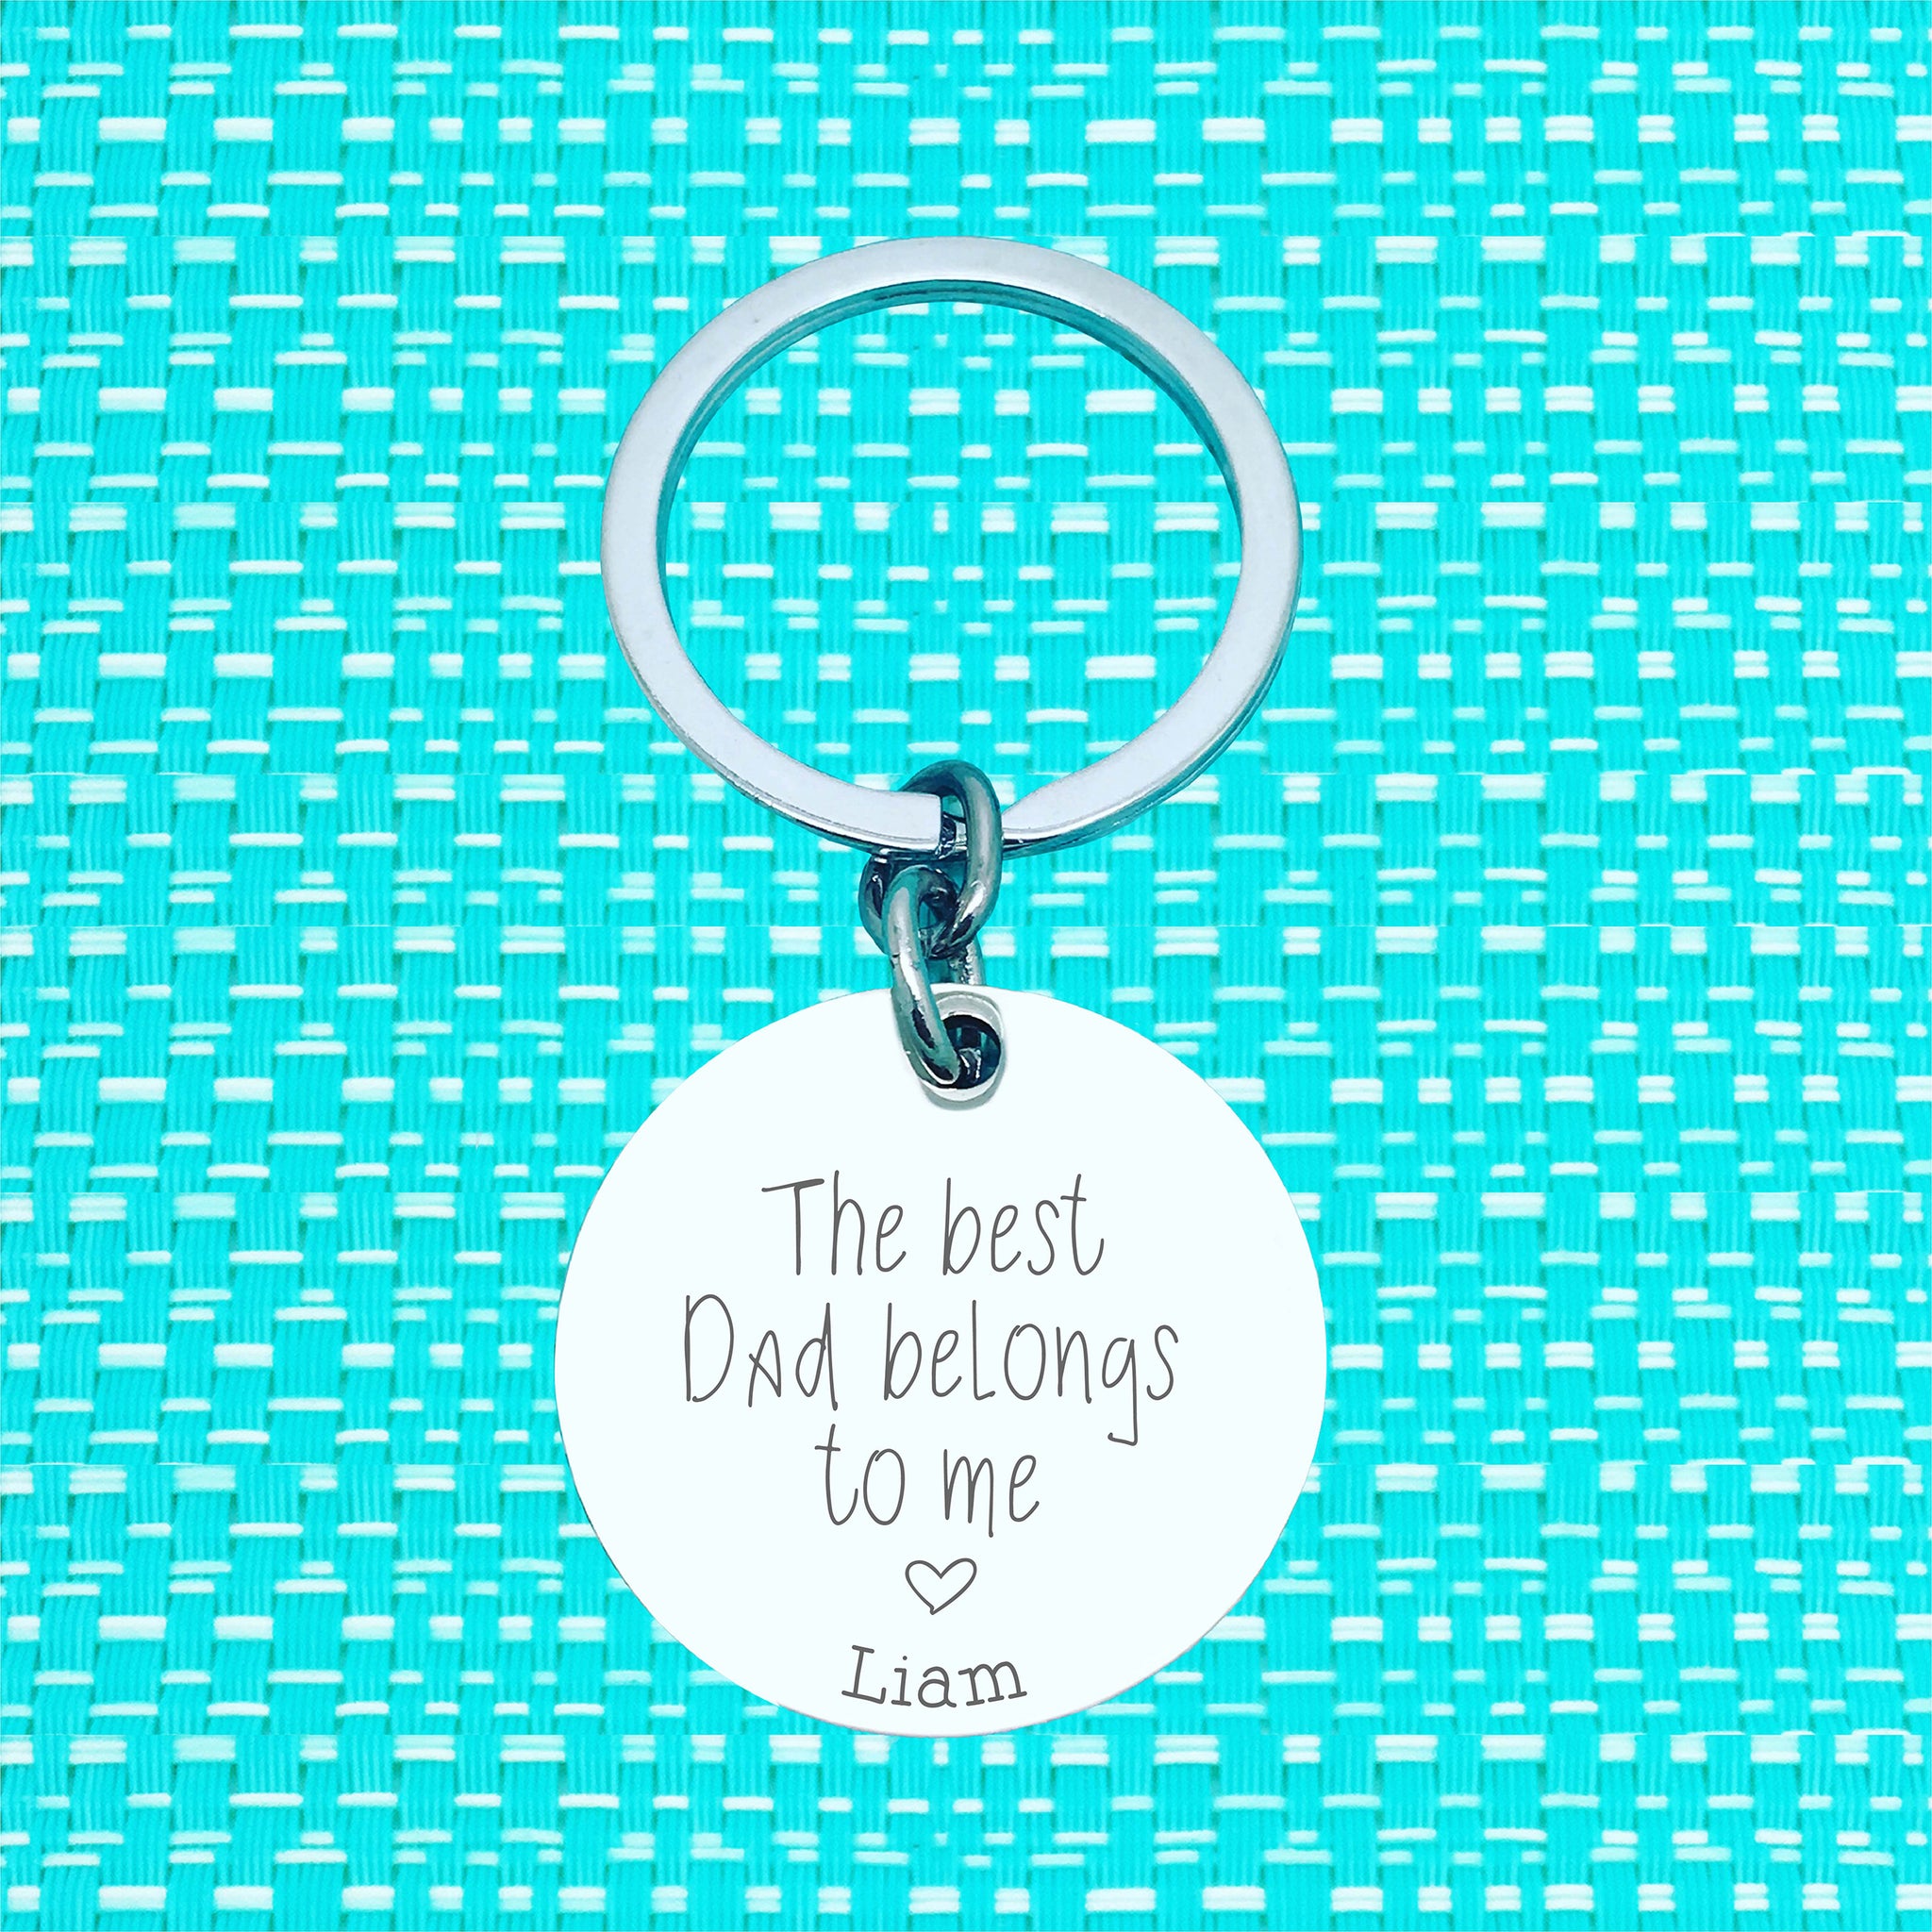 The Best Dad Belongs To Us Personalised Keyring (change Dad to a name of your choosing)